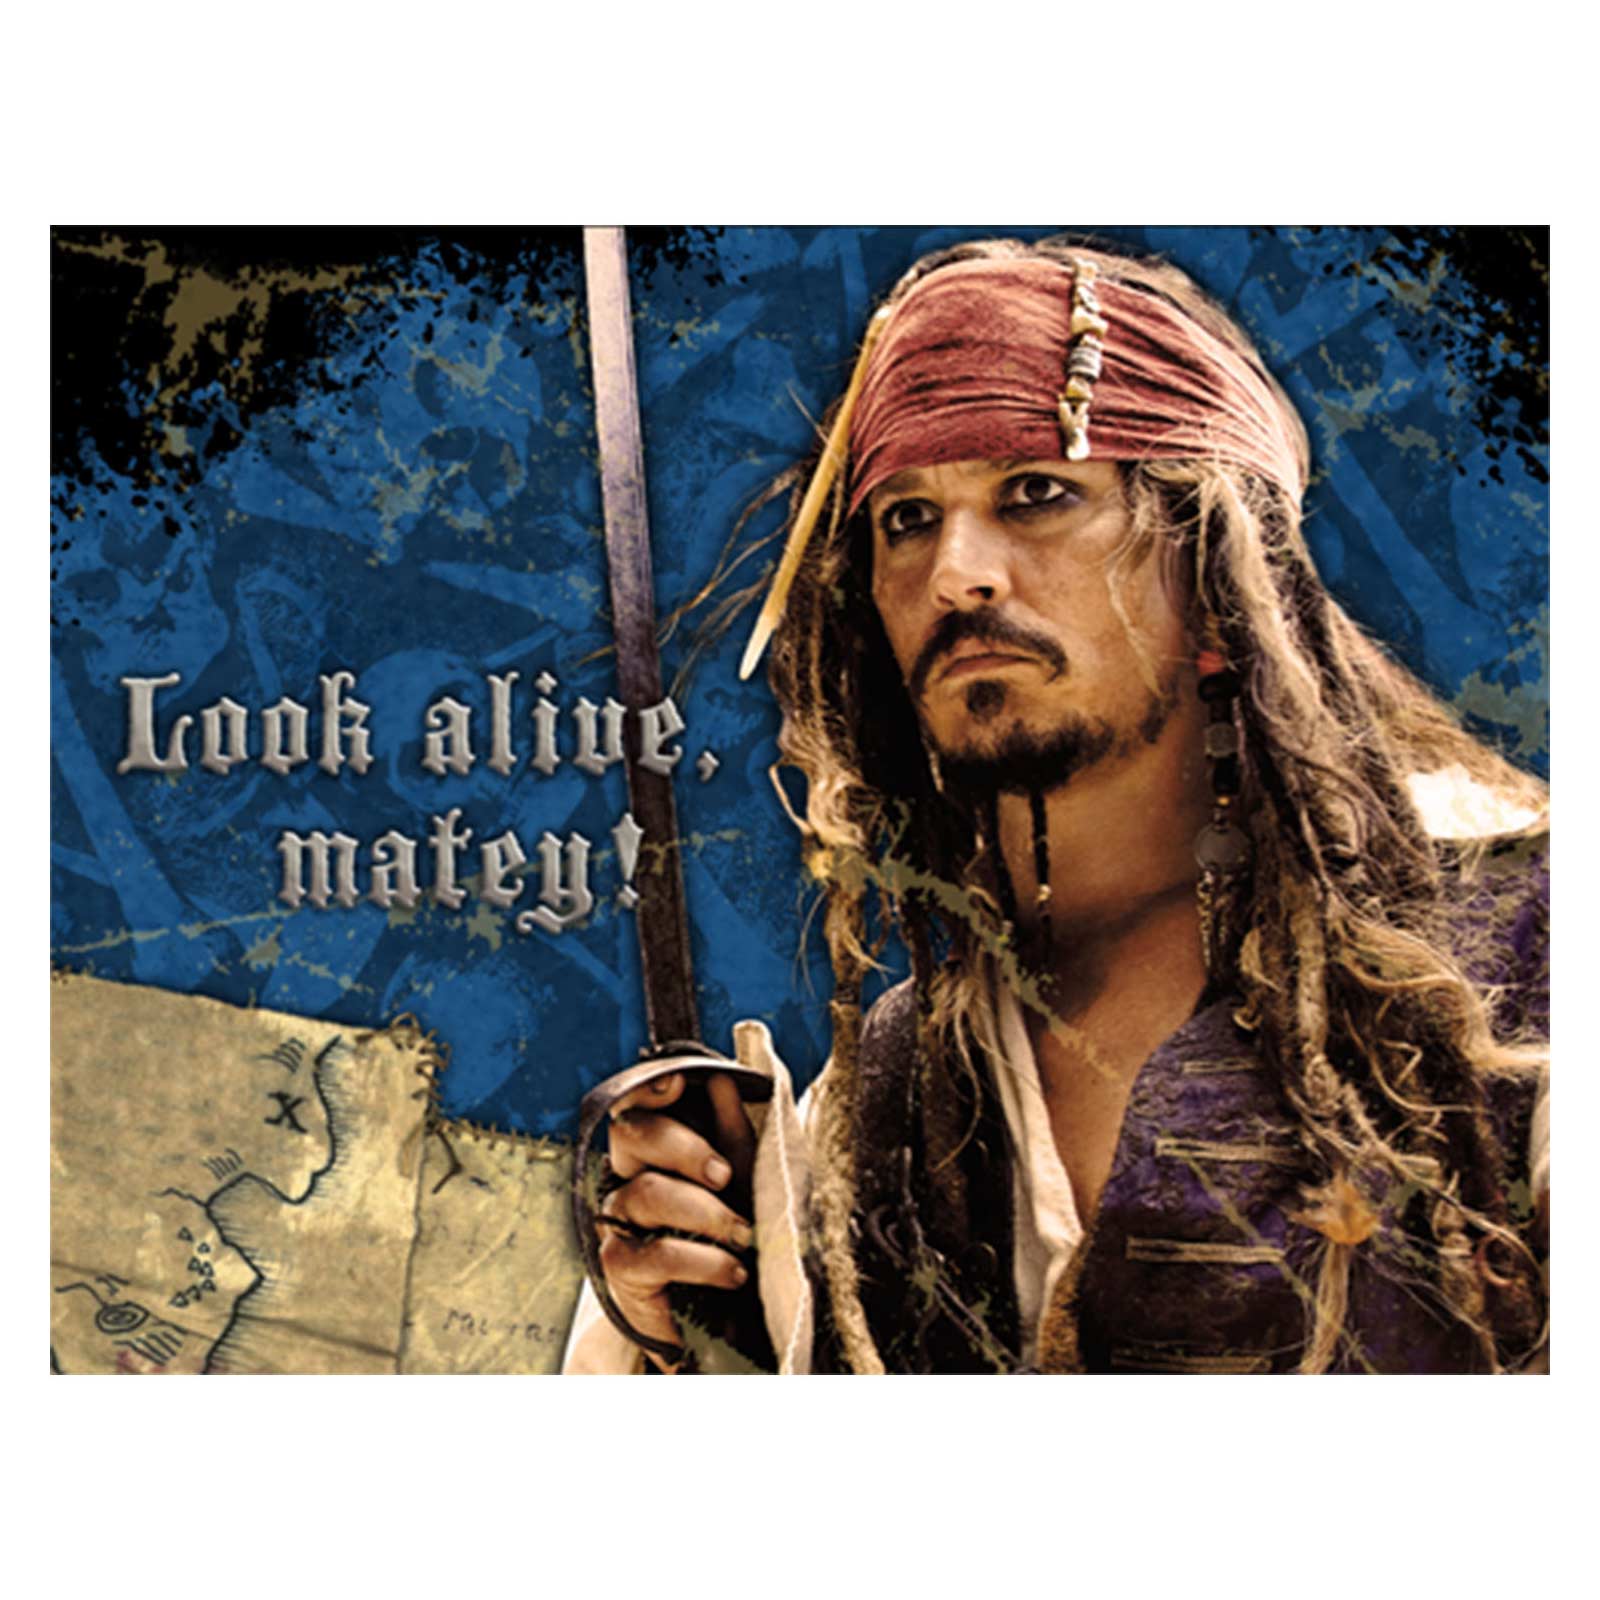 Pirates Of The Caribbean Invitation Cards 8pcs Party Accessories - Party Centre